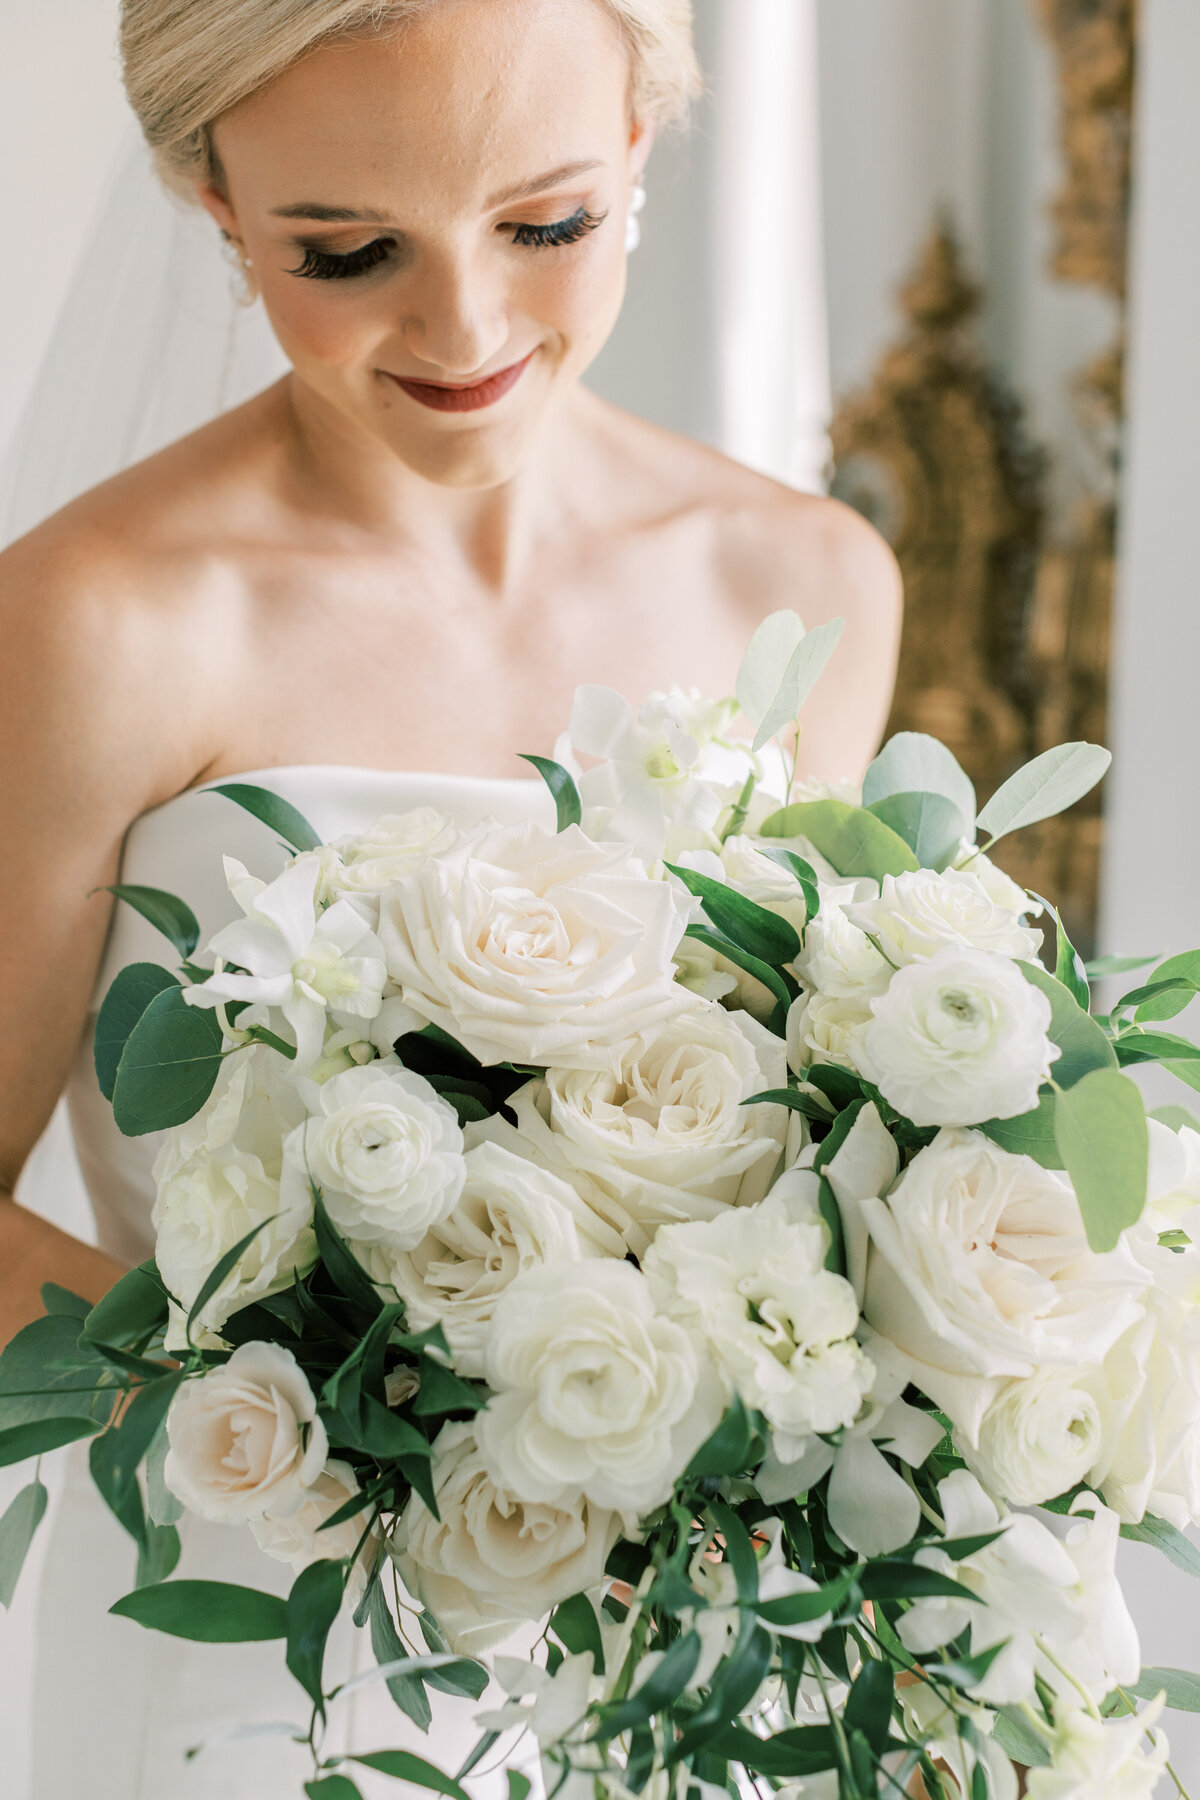 A bride looks down at her white and green bouquet.